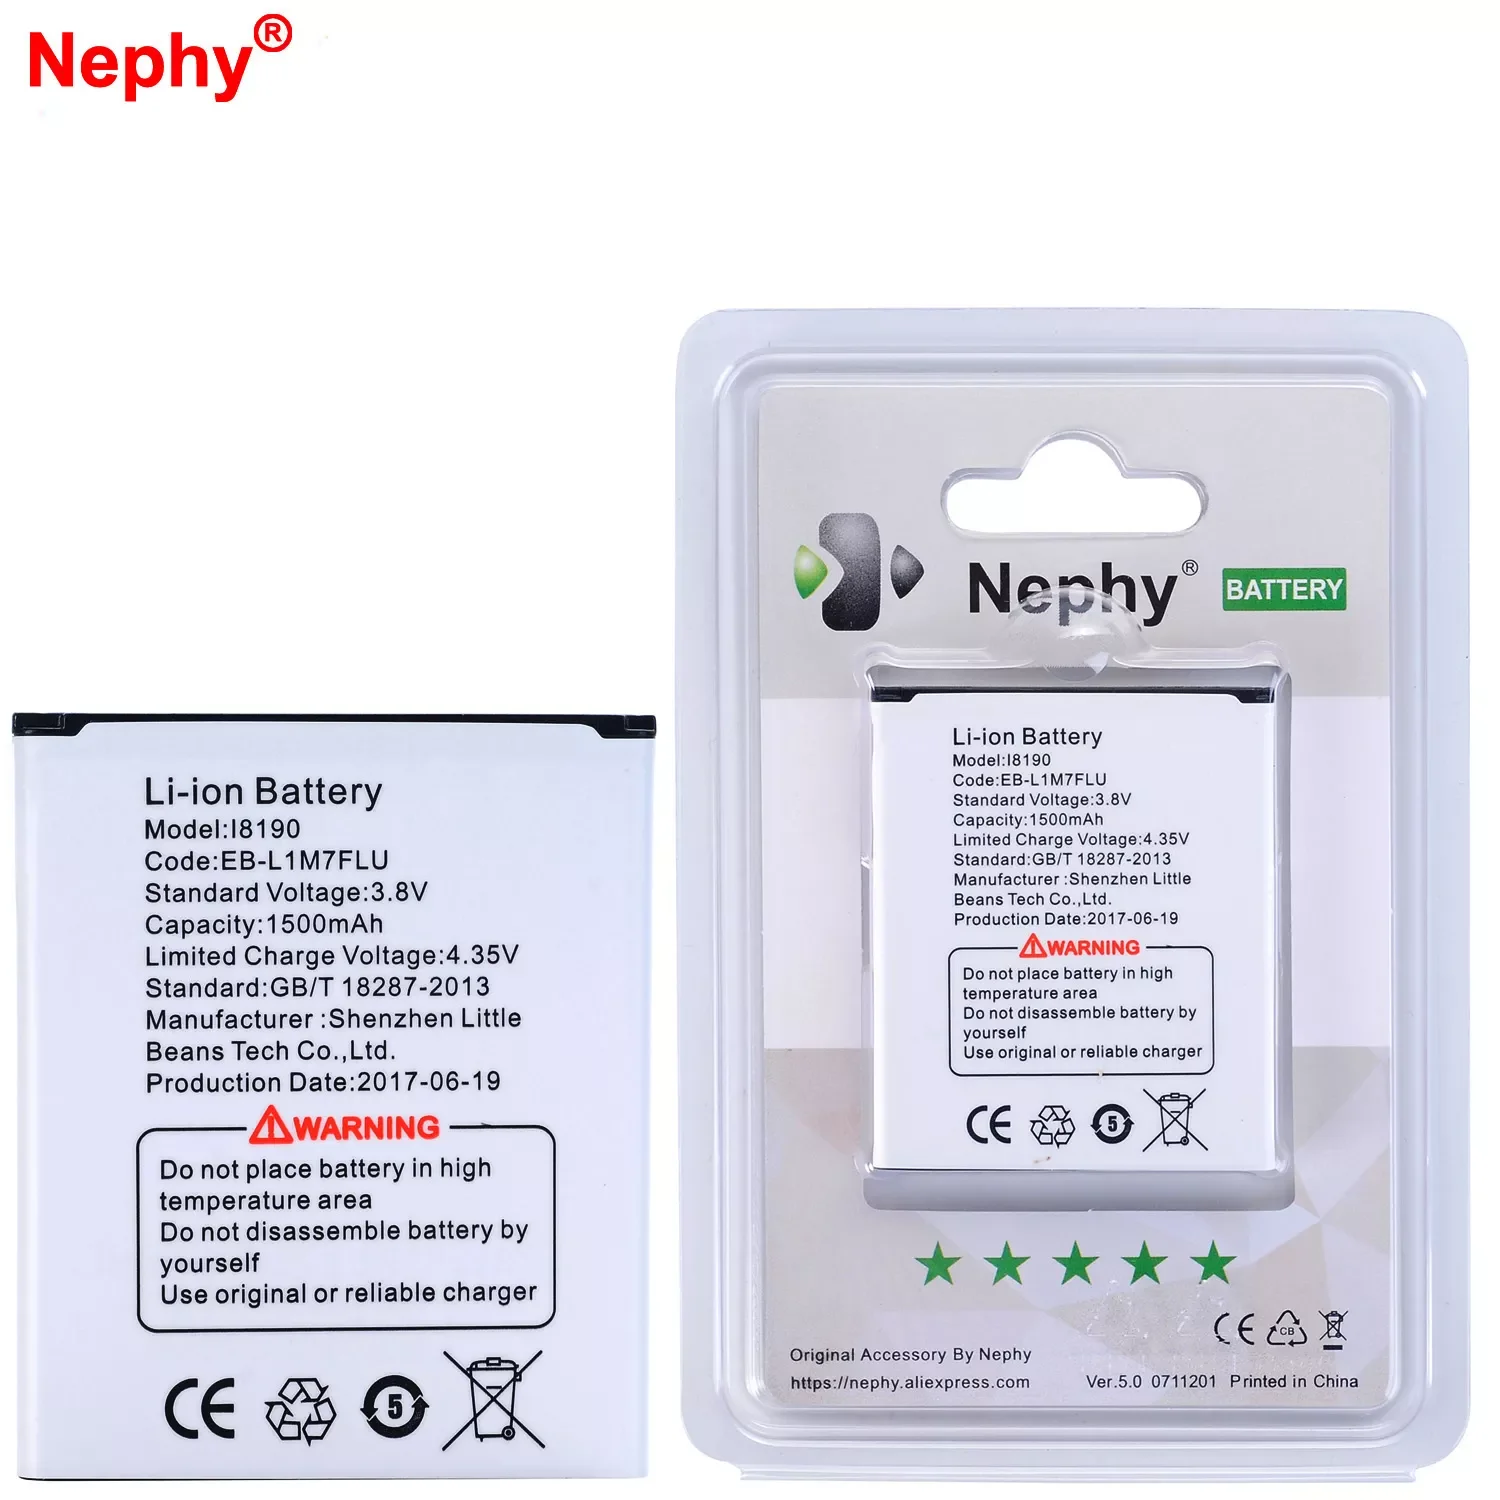 

NEW2023 2019 Nephy Original Battery For Samsung Galaxy S3 Mini i8190 i8190N Ace 2 I8160 Trend I699 S Duos S7562 S7568 GT-S7562 1